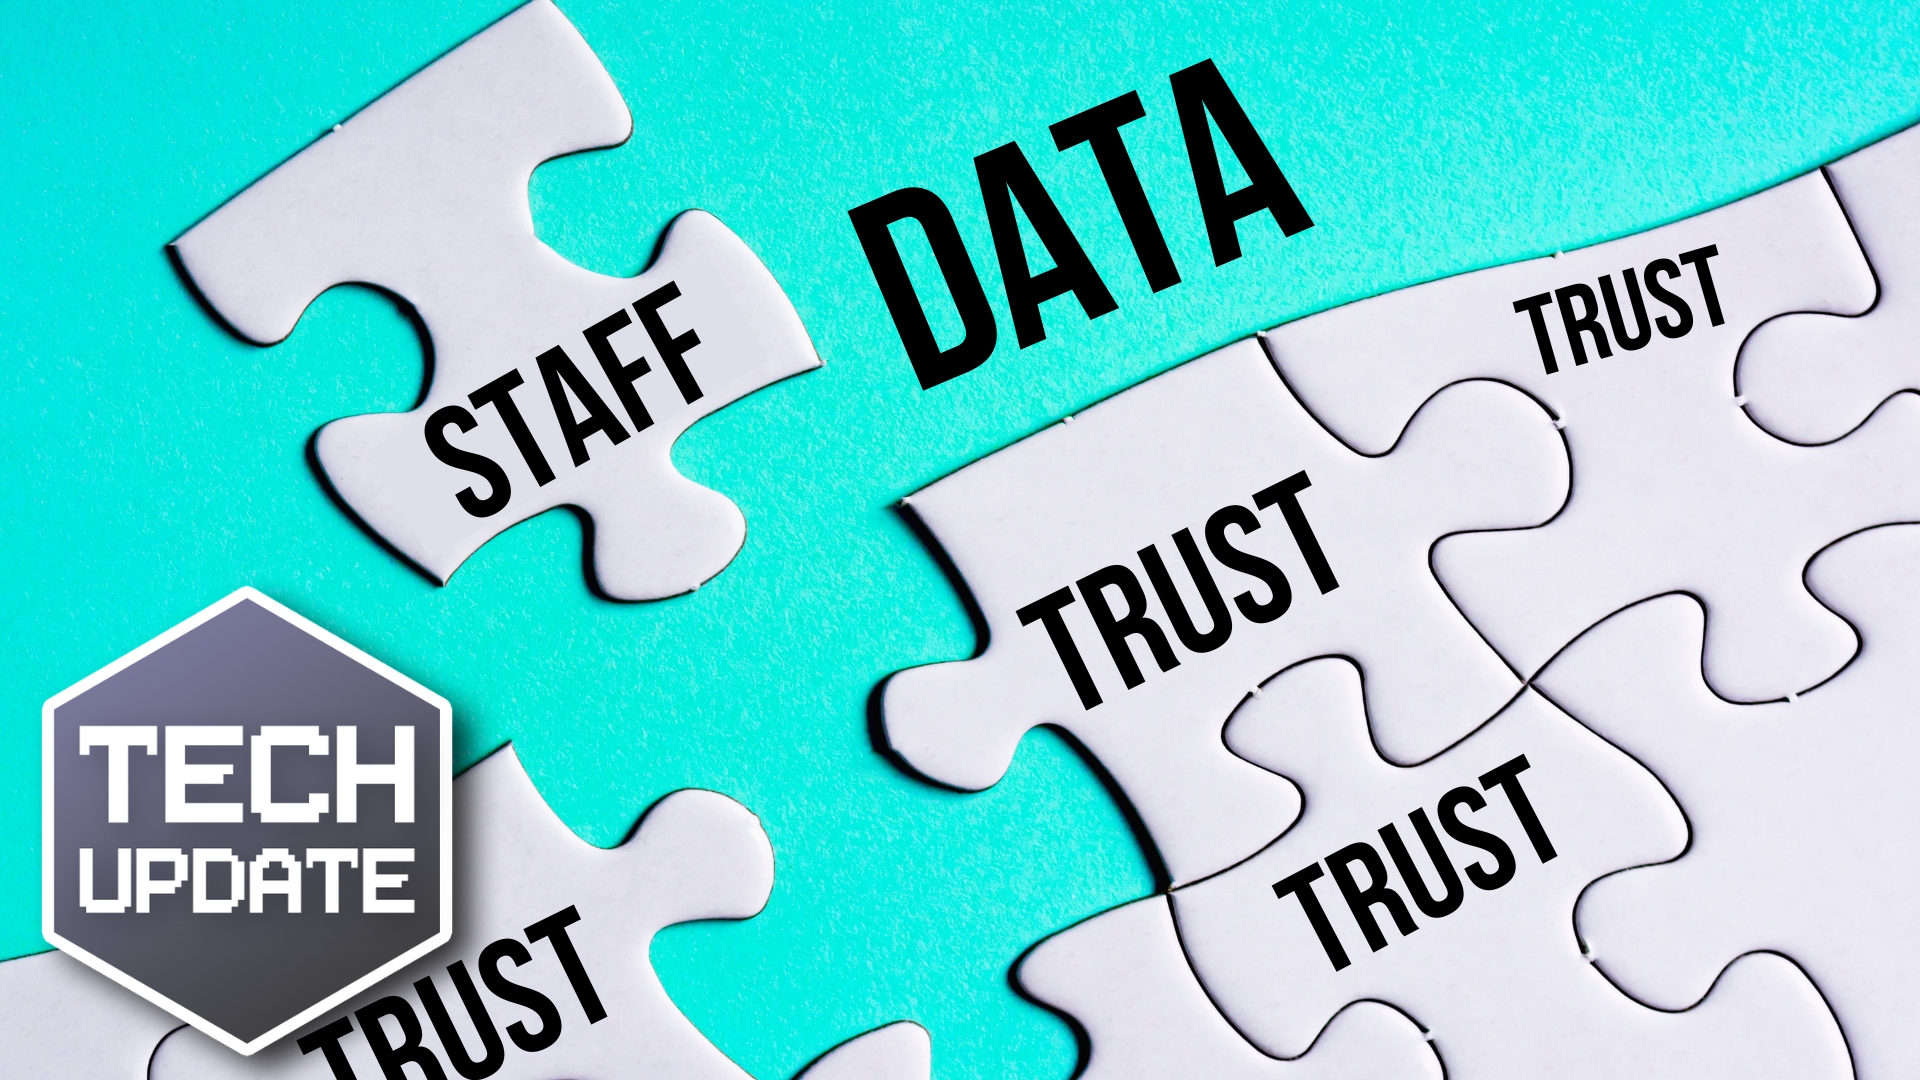 A third of business owners don’t trust their staff